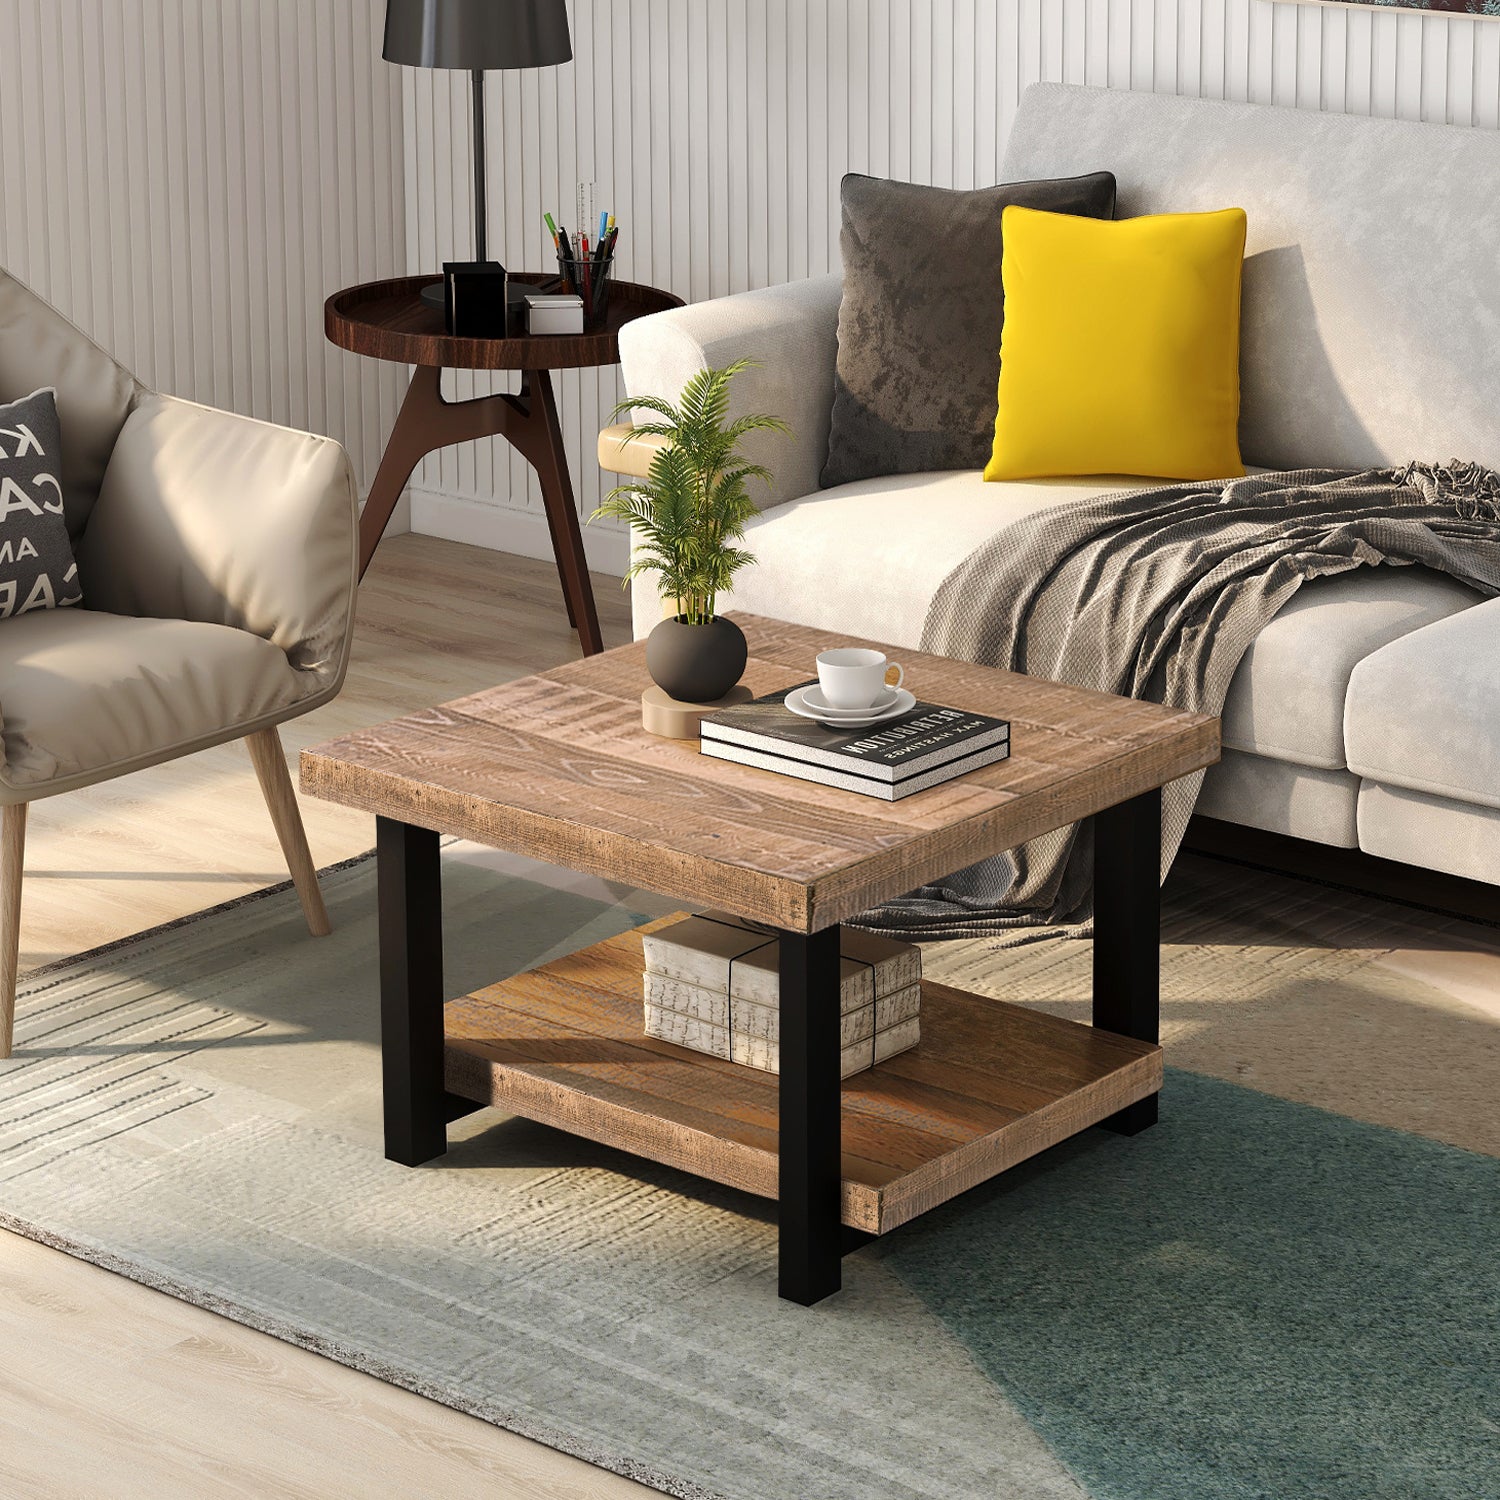 TREXM Rustic Natural Coffee Table with Storage Shelf for Living Room, Easy Assembly (26"x26")